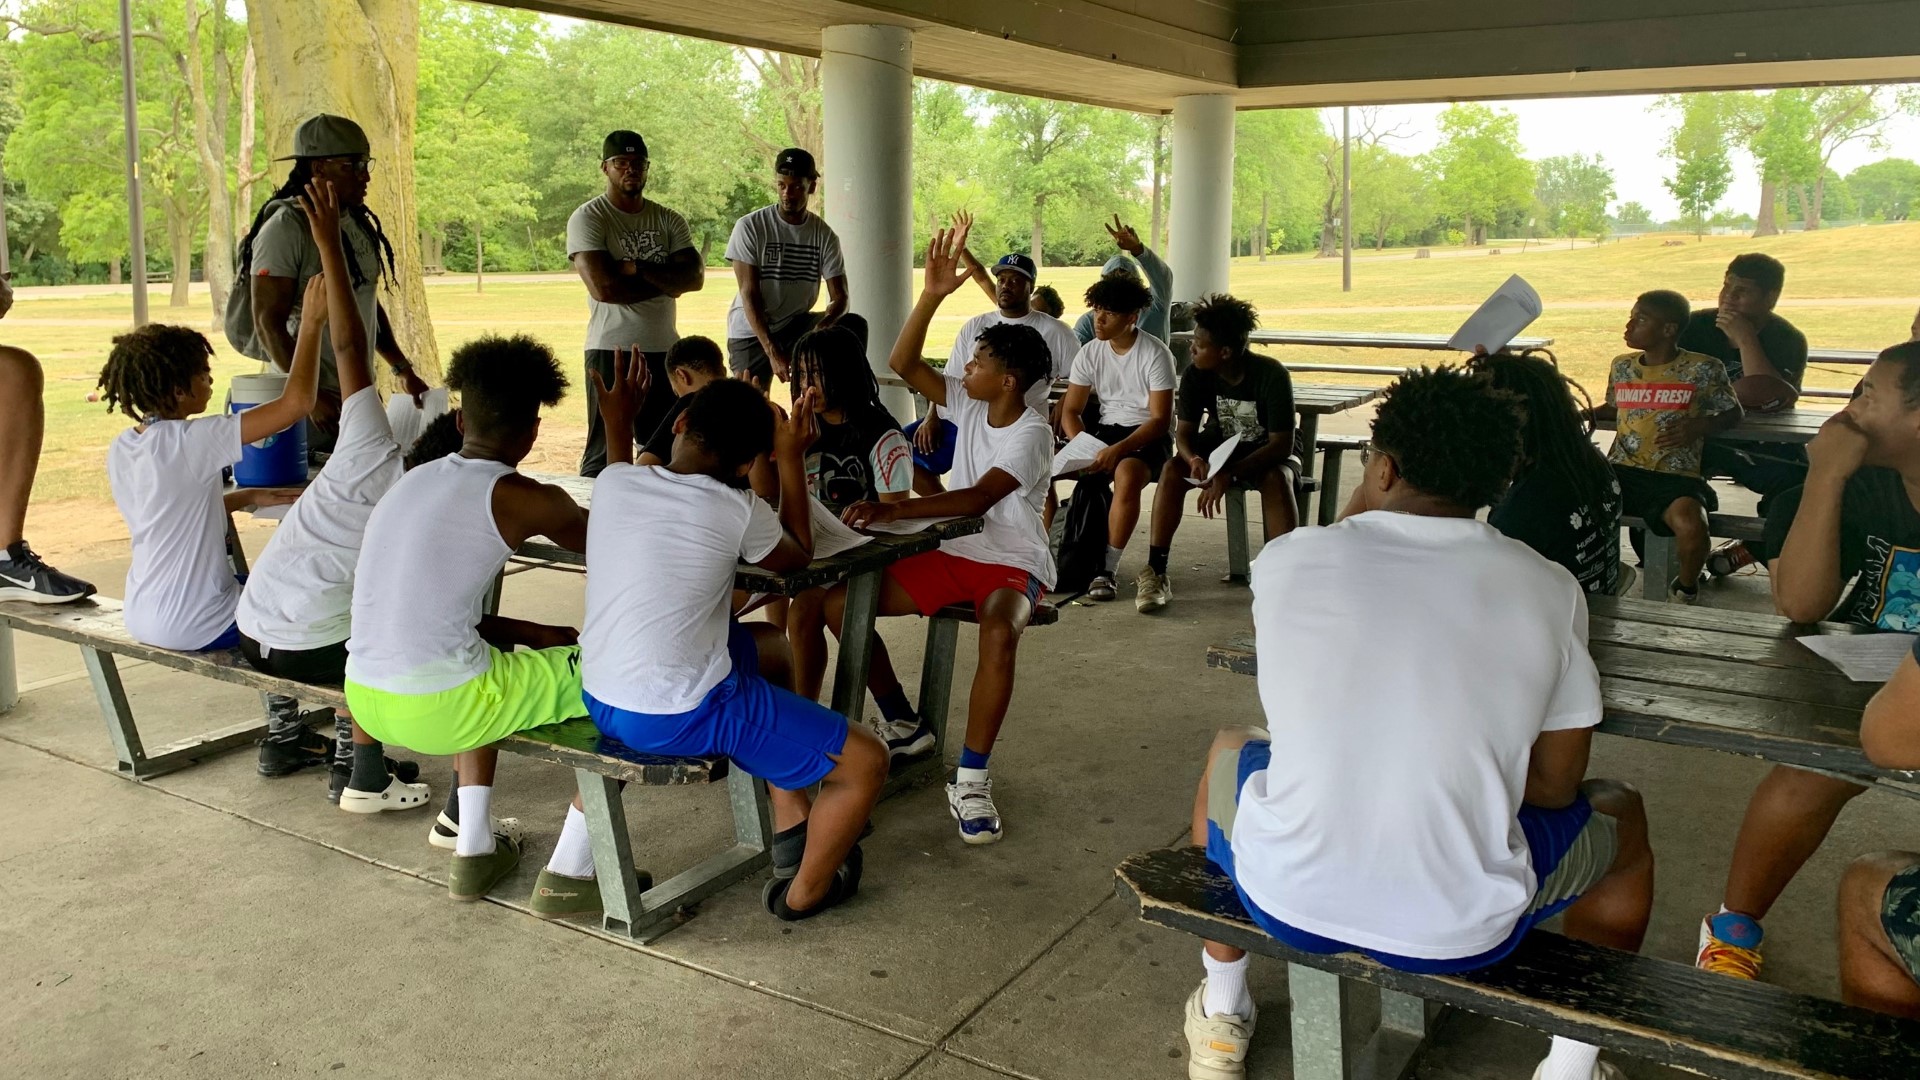 Every week, Kareem Hines and other mentors come to Lawrence Park to play football and have a community forum.